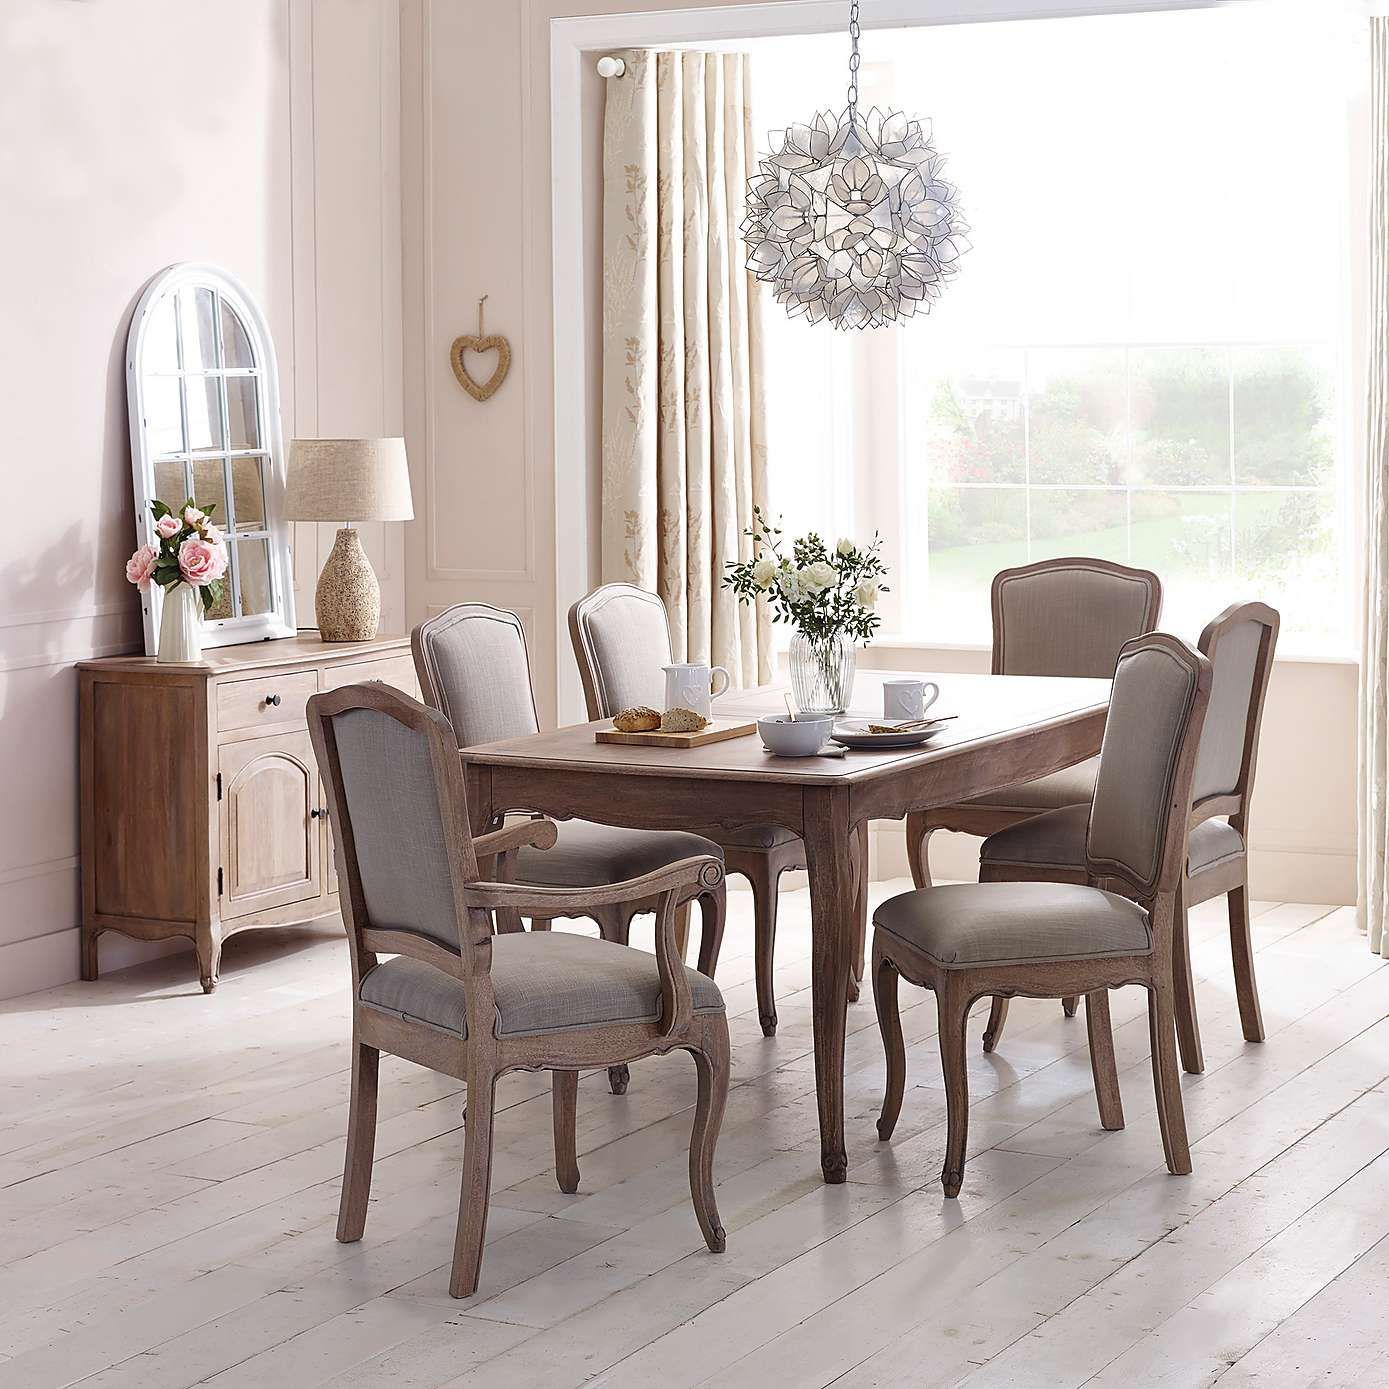 Amelie Extending Dining Table Beauchamp House Extendable within size 1389 X 1389